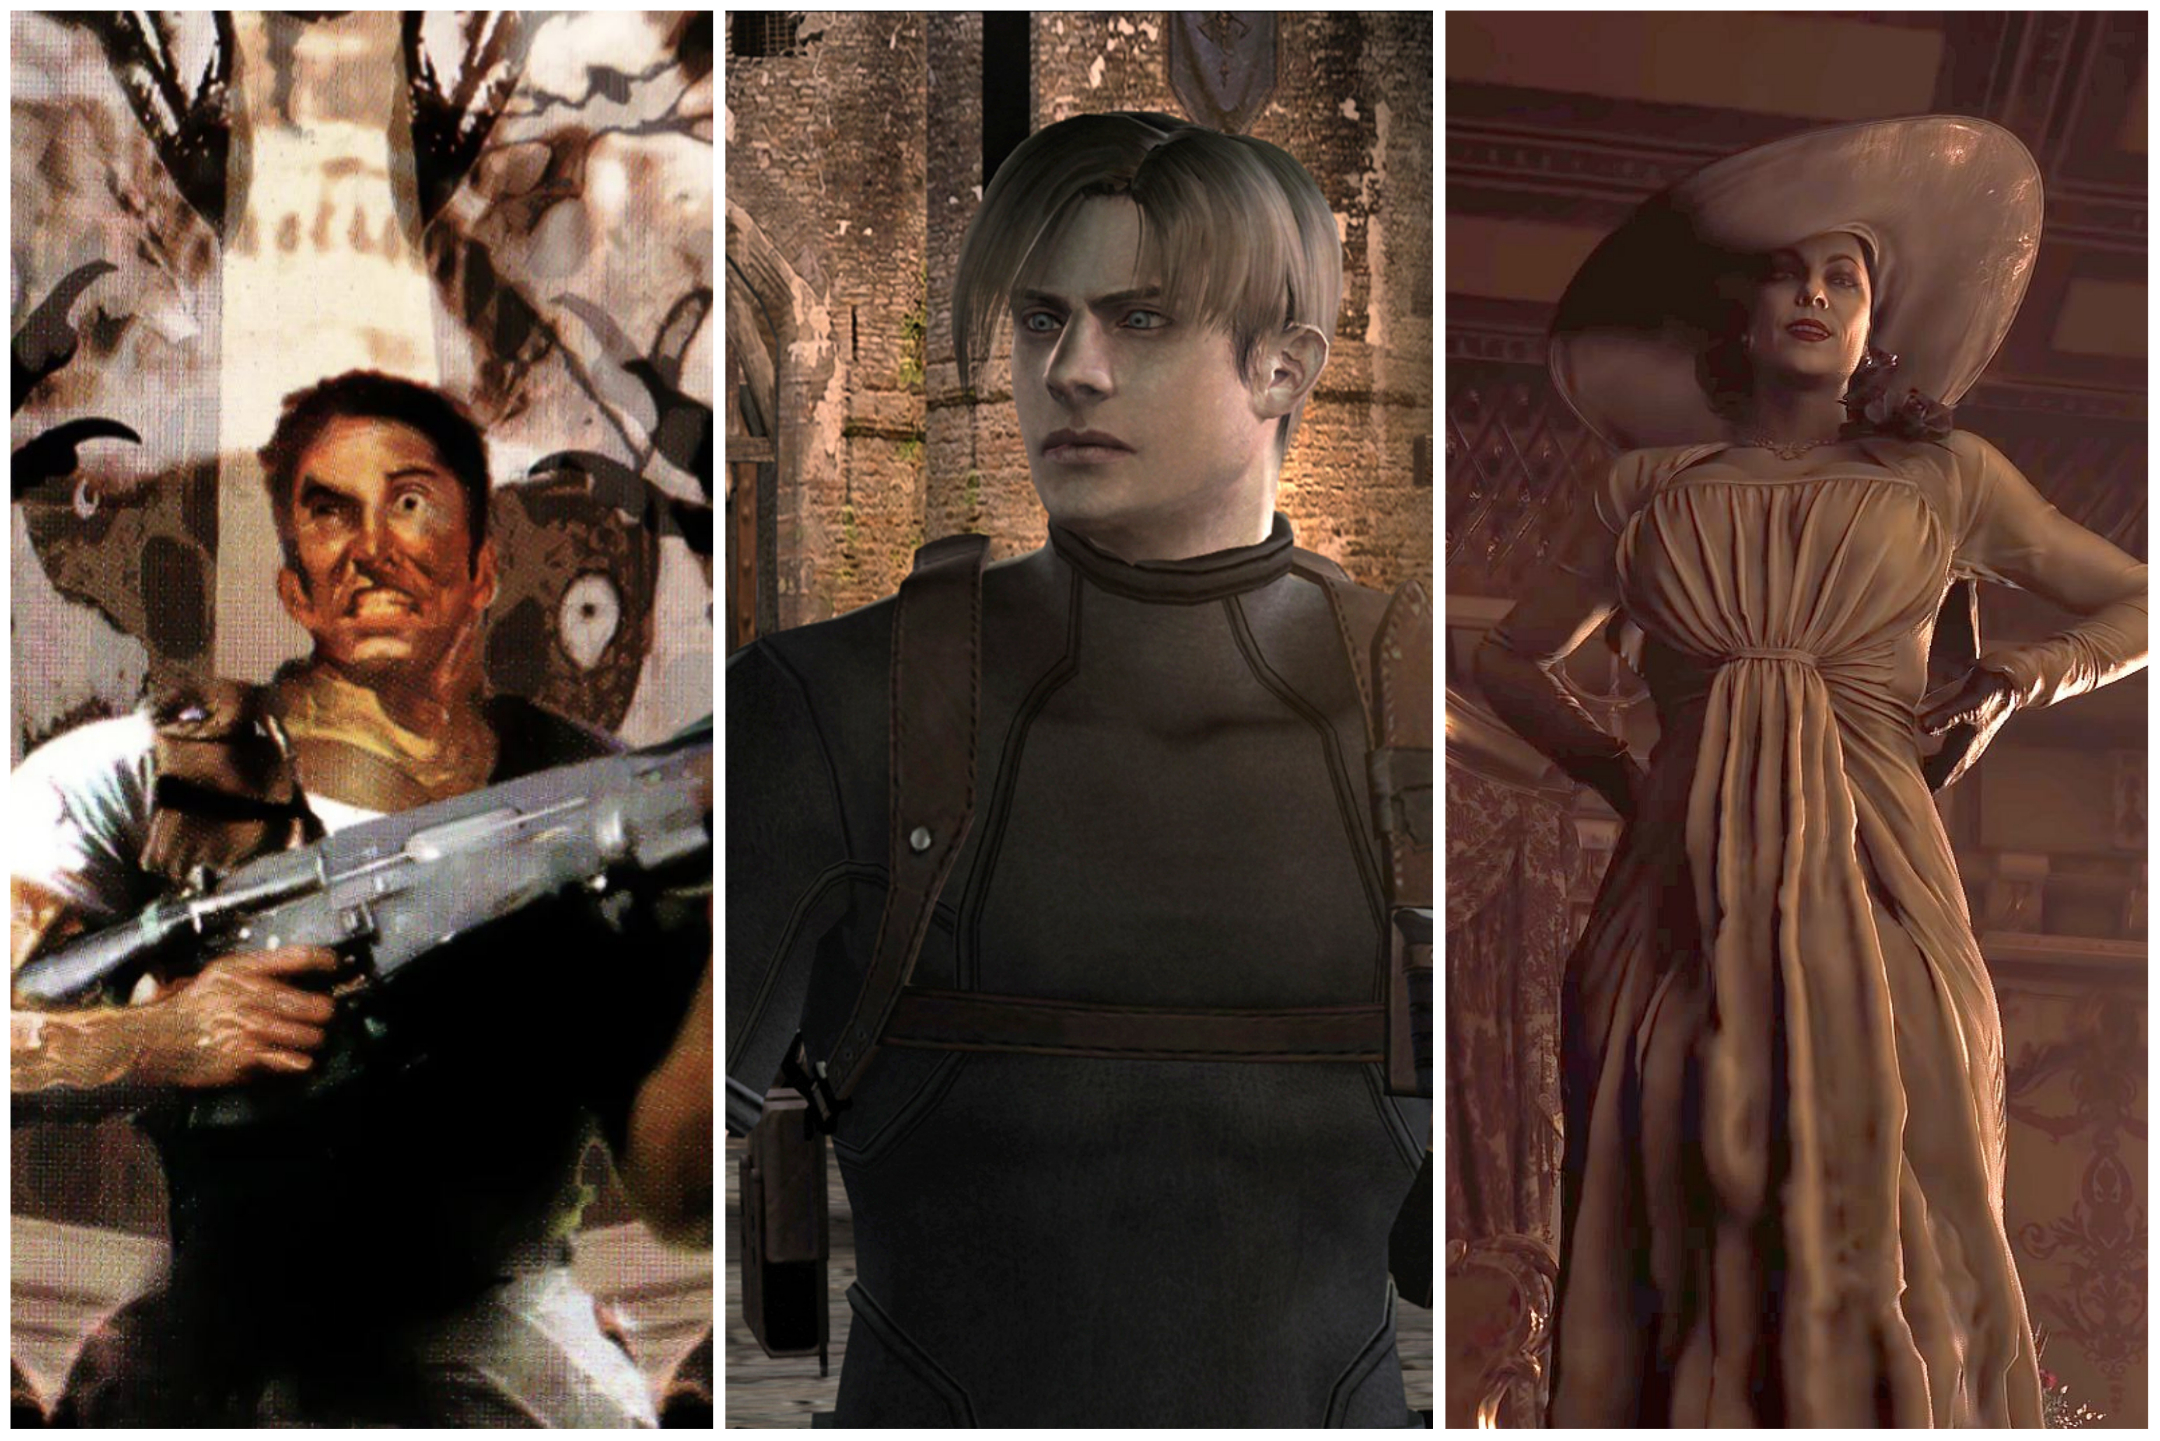 Can the 'Resident Evil 4' Remake Redefine the Franchise's Tone